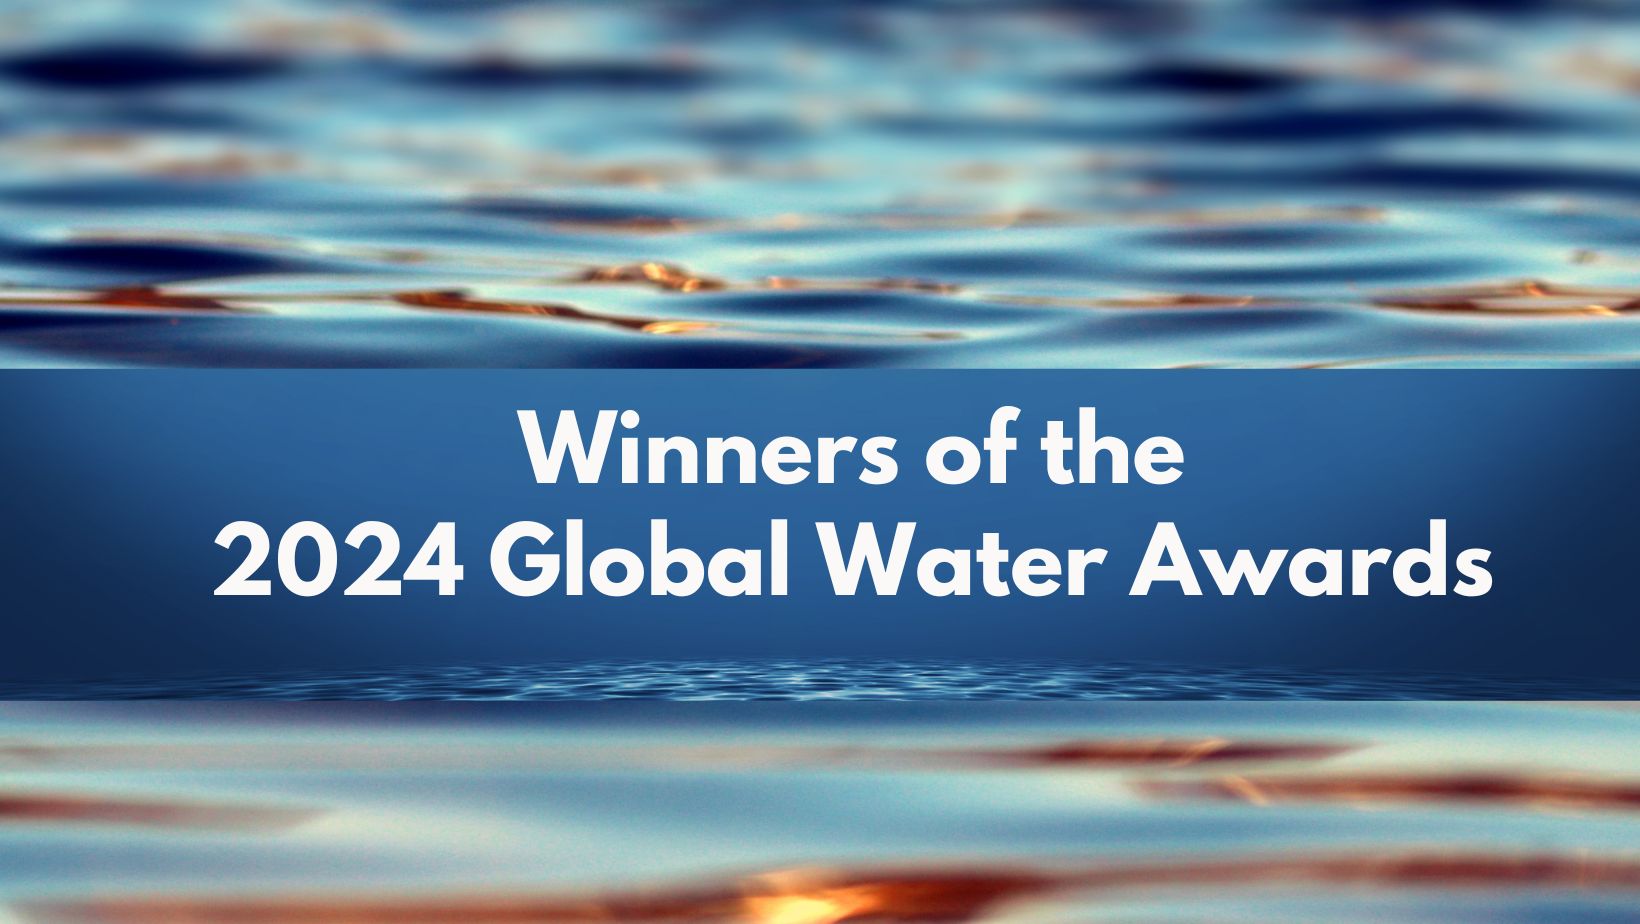 WATER IS THE LIFEBLOOD OF OUR PLANET: Winners of the 2024 Global Water Awards